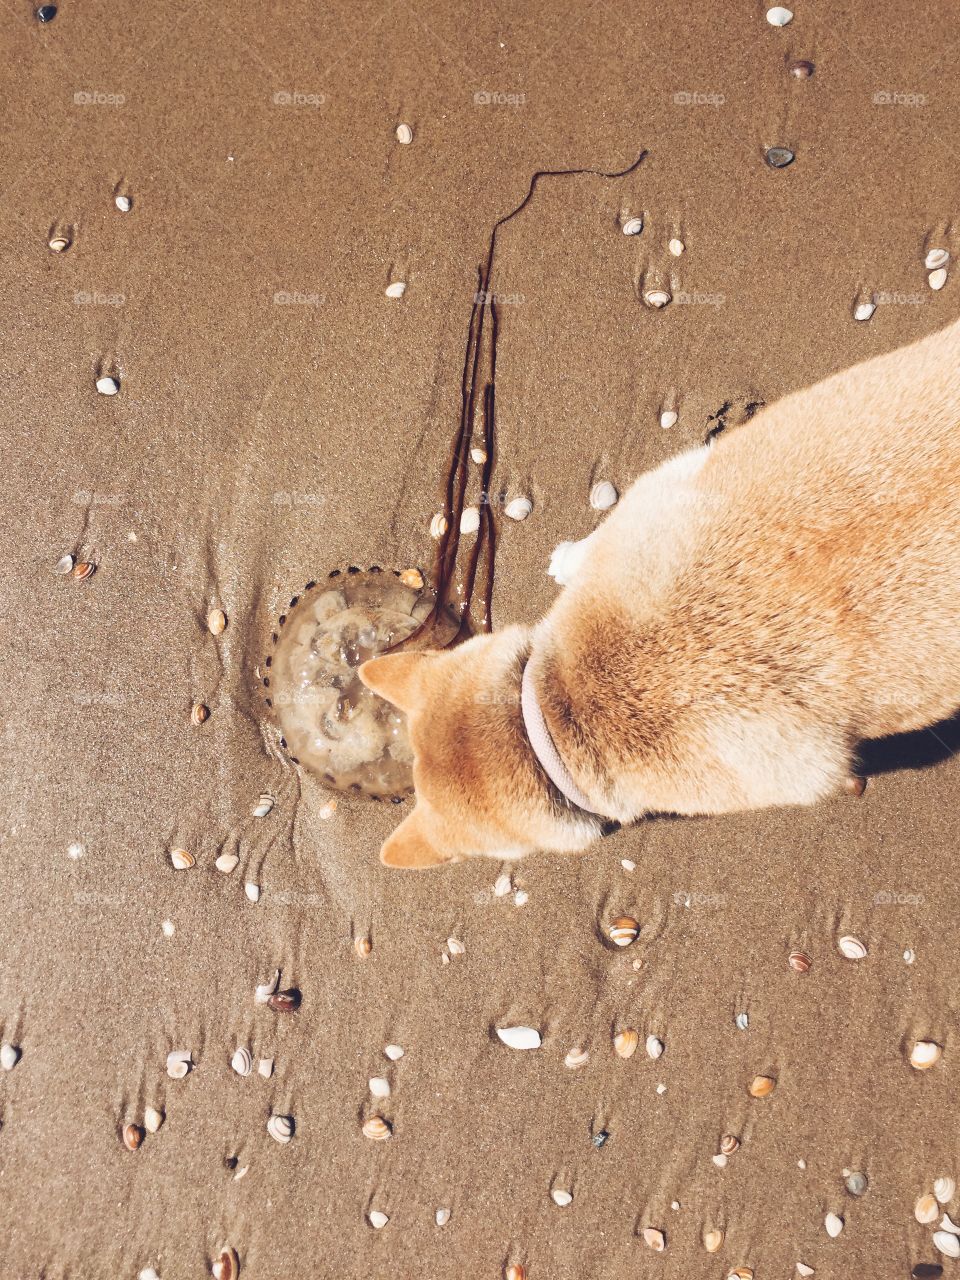 Watch your nose Foxy!. Foxy the shiba inu found a jellyfish on the beach. You better watch your nose Foxy!